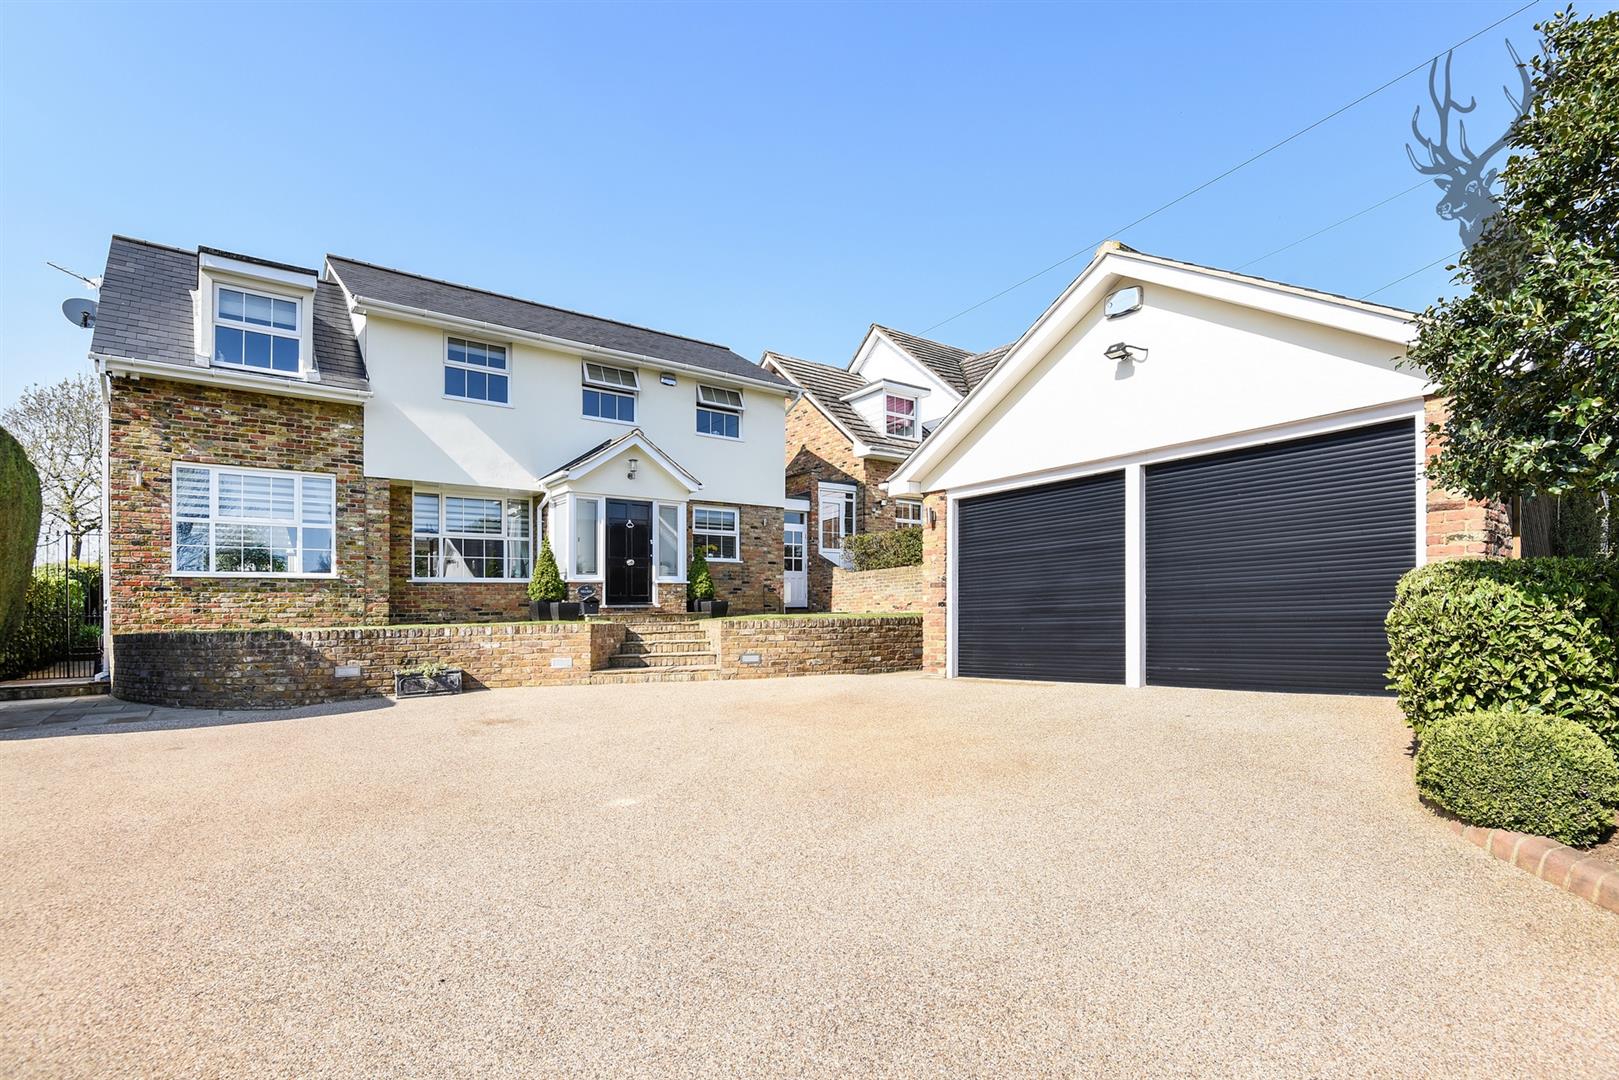 Similar Property: House - Detached in Theydon Bois